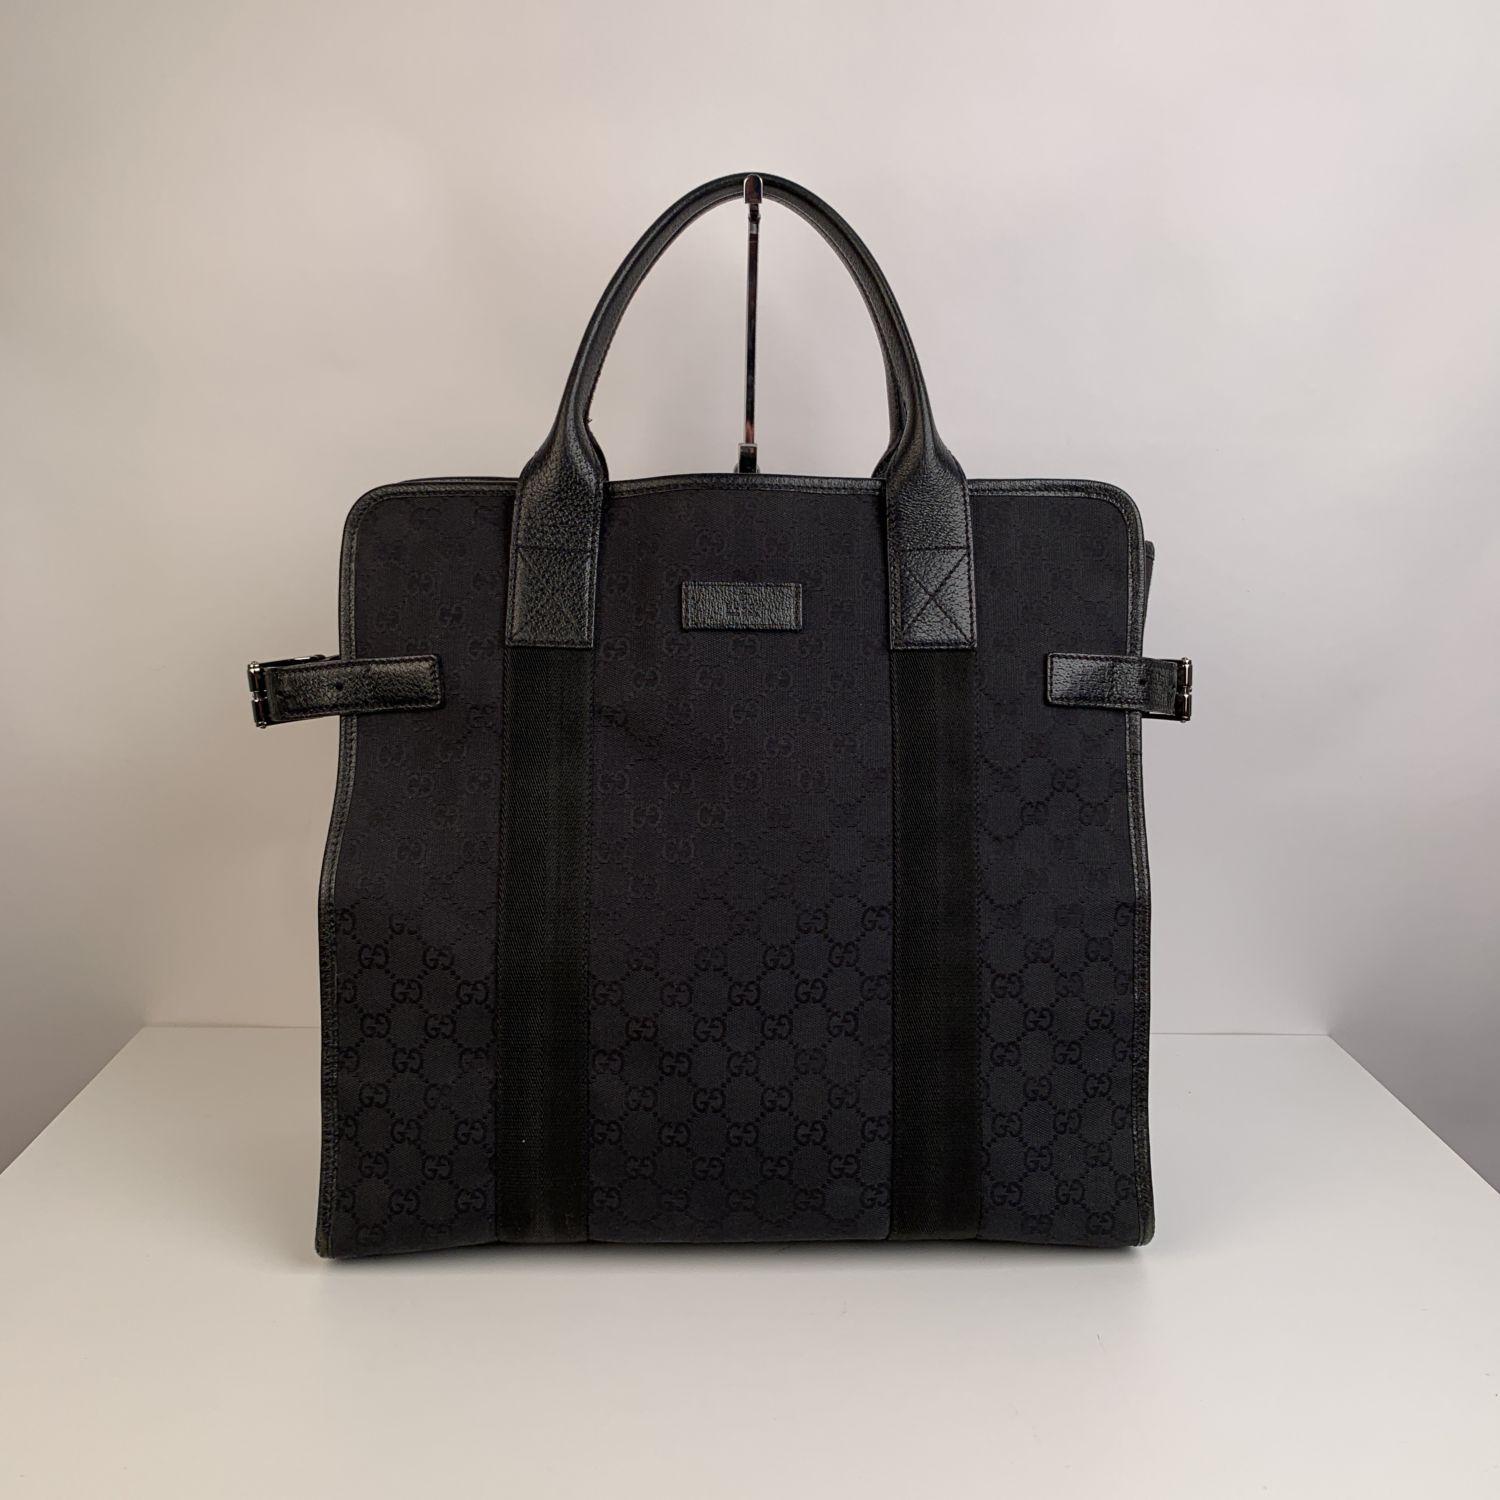 Beautiful Gucci tote Shopping bag made in black monogram canvas with blackleather trim and handles. Open top. Black fabric lining . 1 side zip pocket and 1 side open pocket inside. 'GUCCI- made in italy' tag inside (with serial number on its